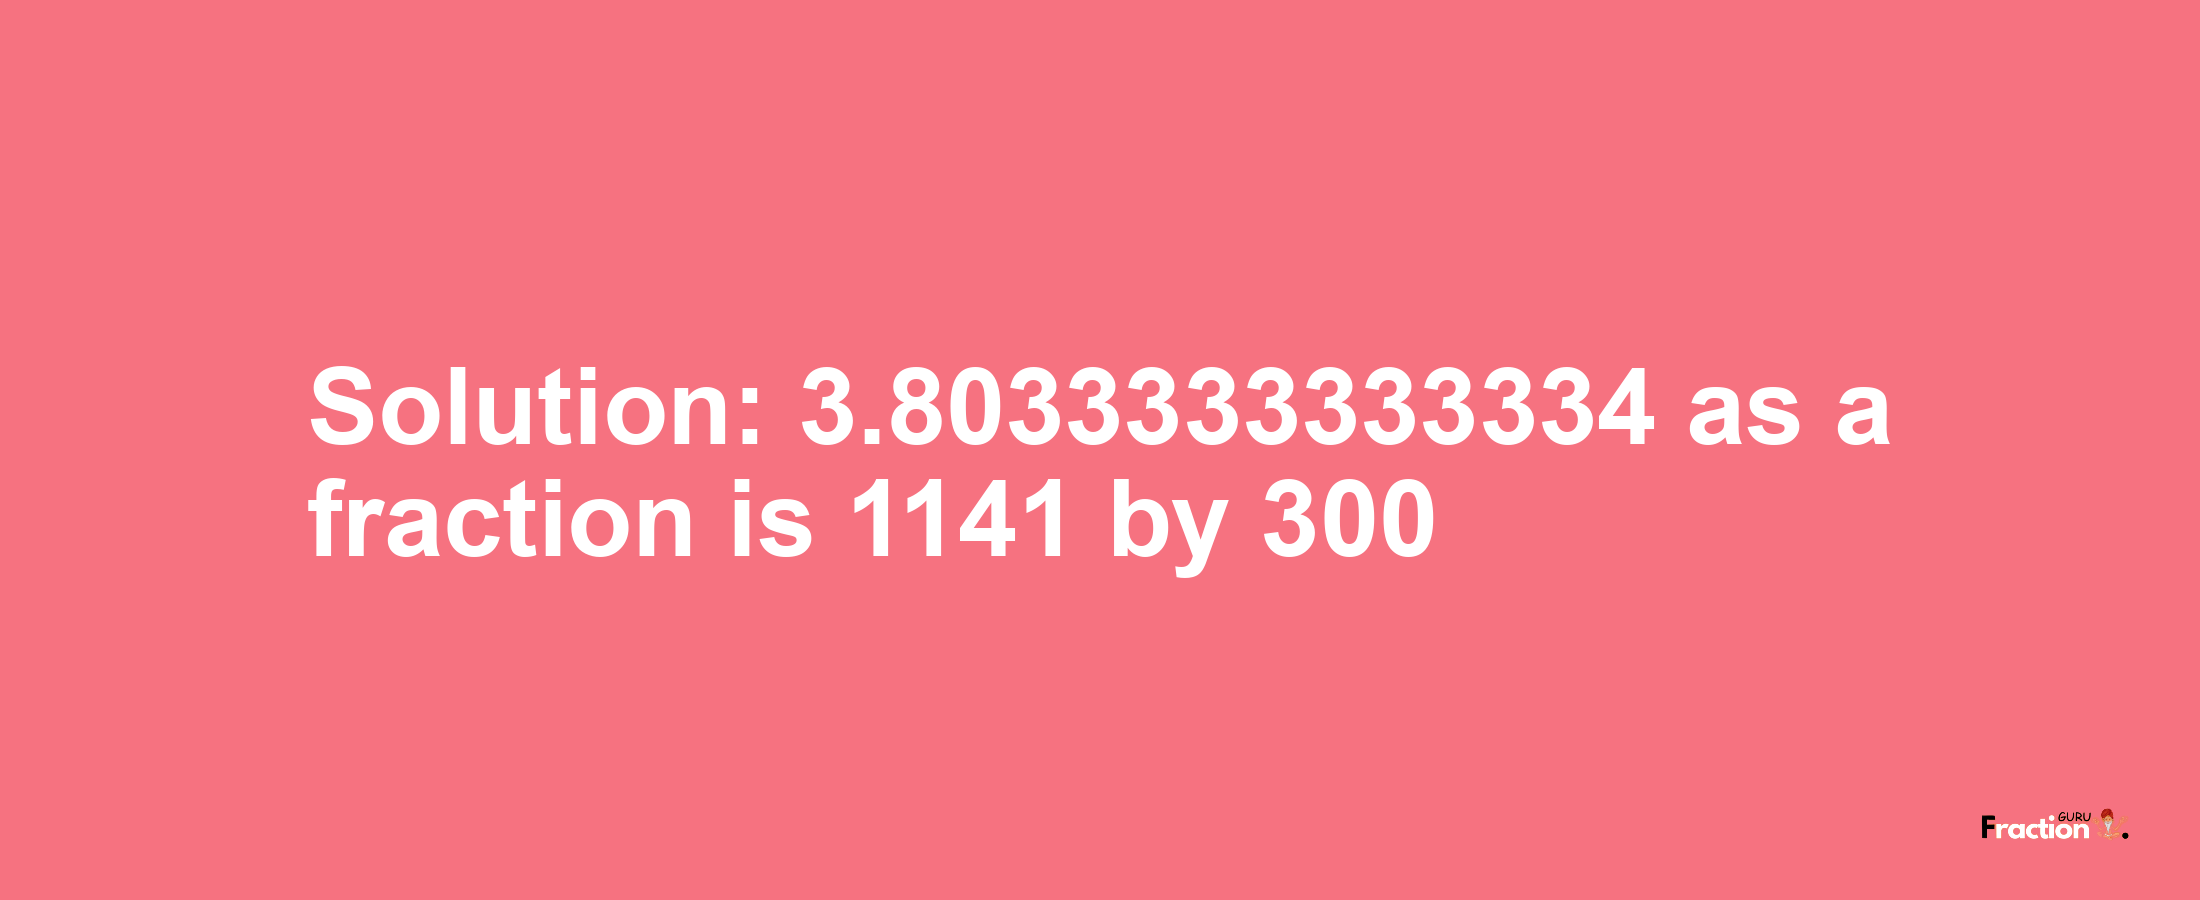 Solution:3.8033333333334 as a fraction is 1141/300